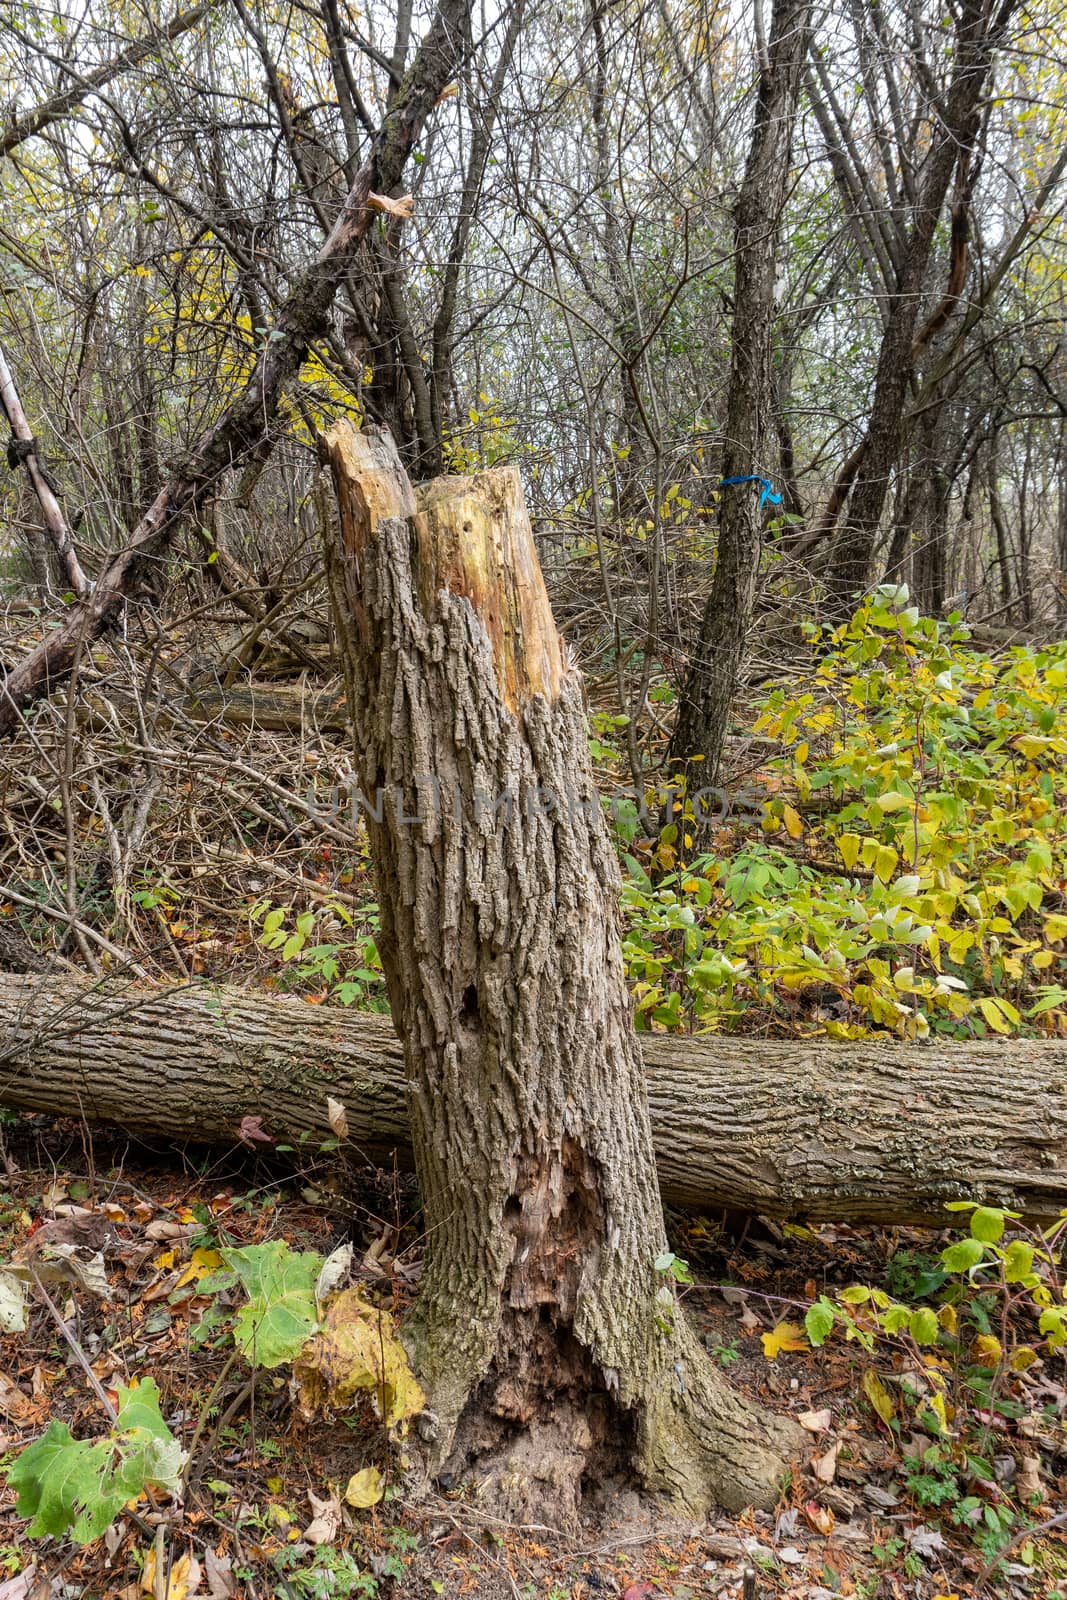 Broken tree and rotting stump near by ben44